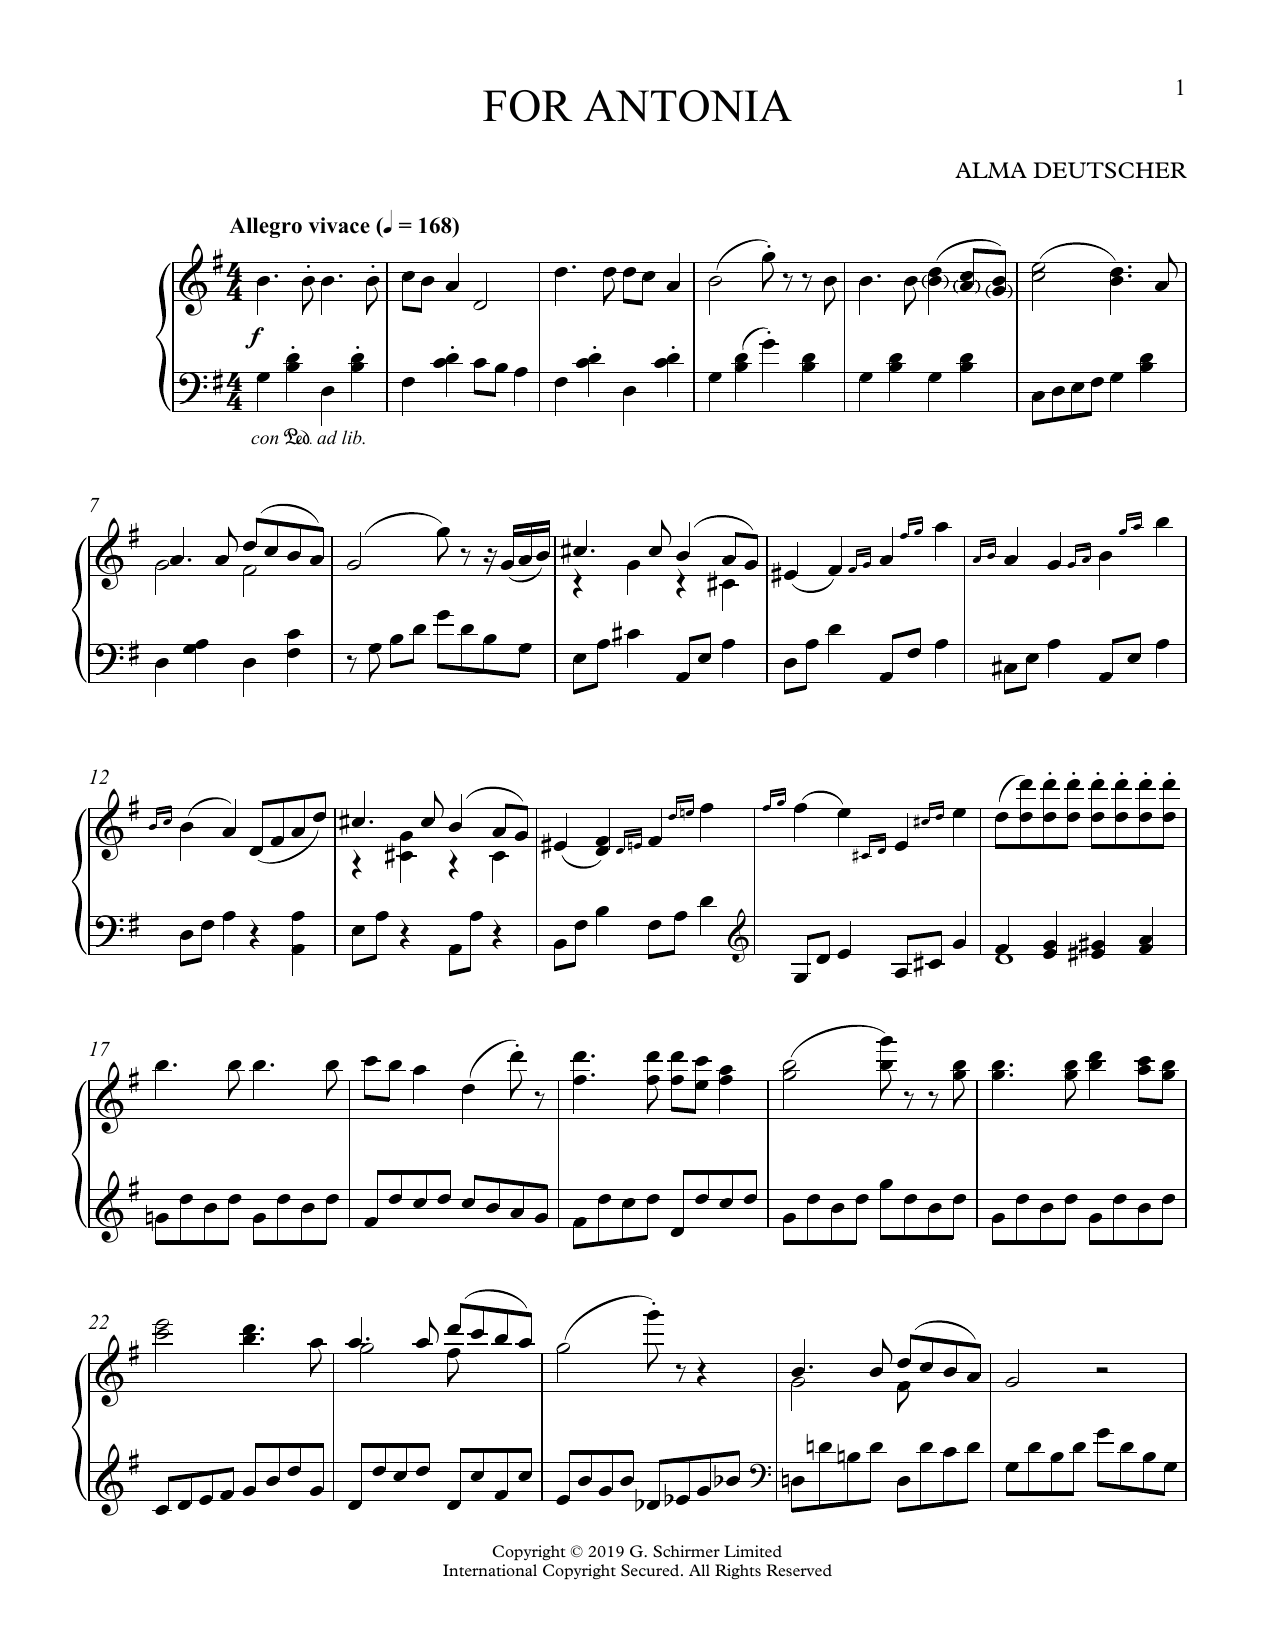 Download Alma Deutscher For Antonia (Variations on a Melody in Sheet Music